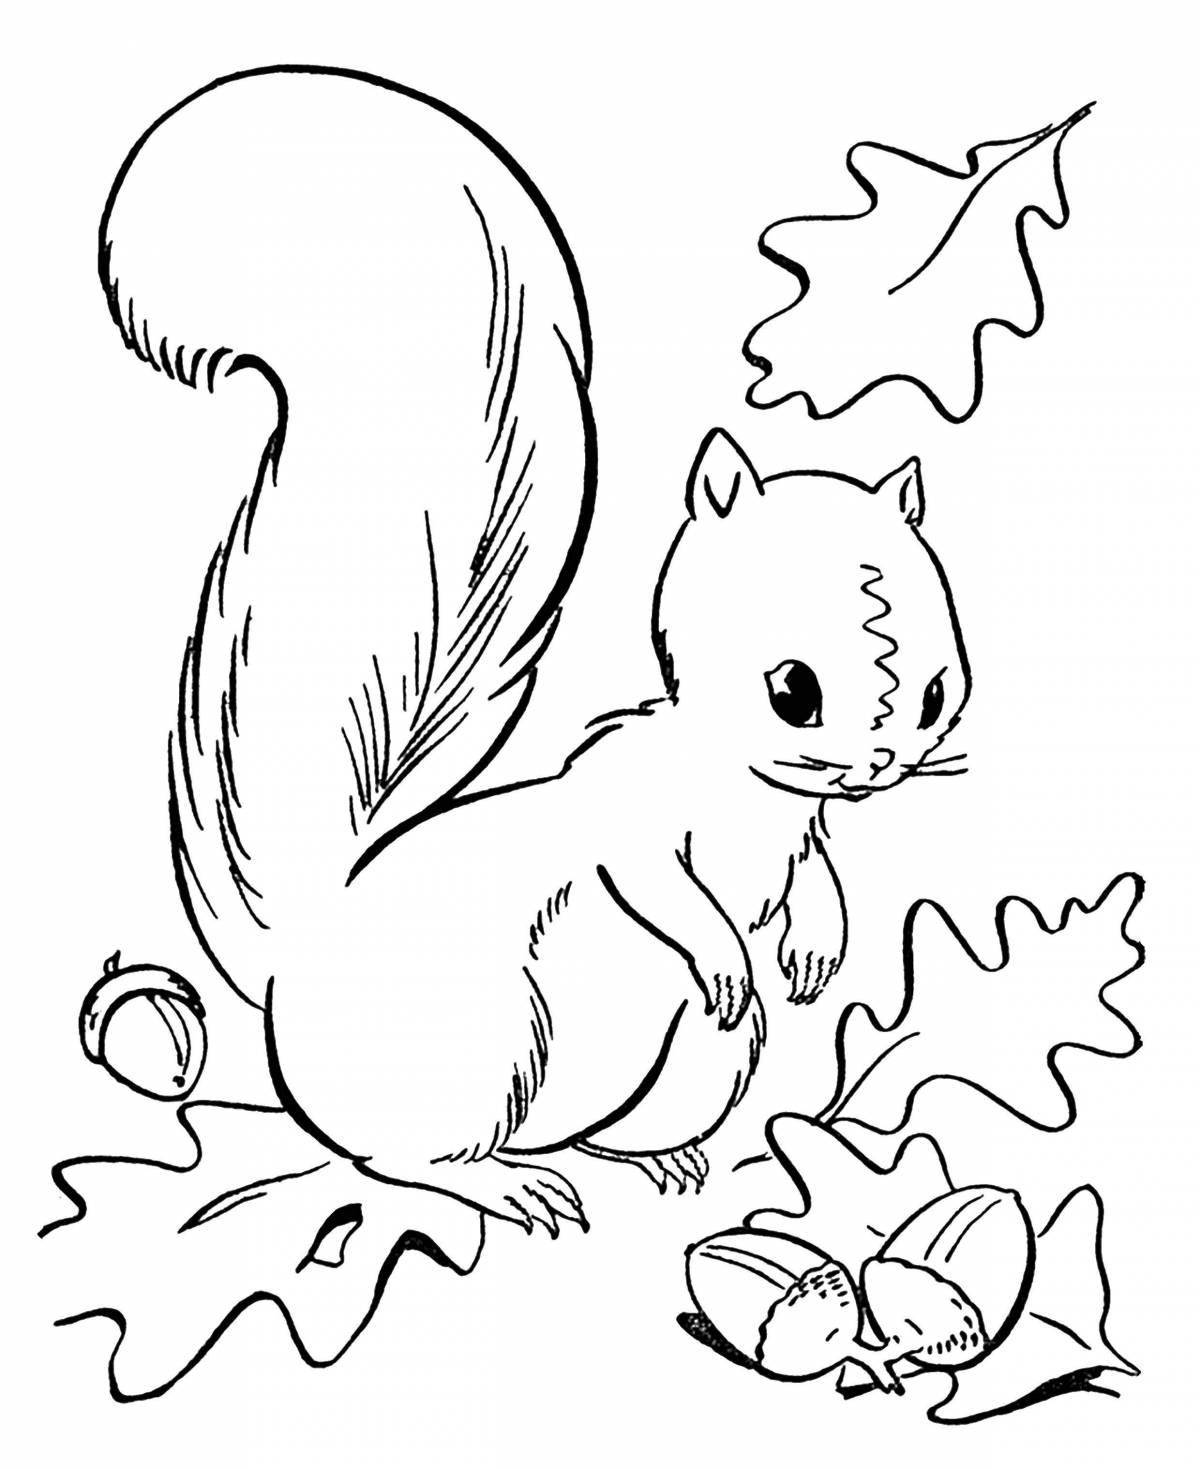 Colored squirrel with bump